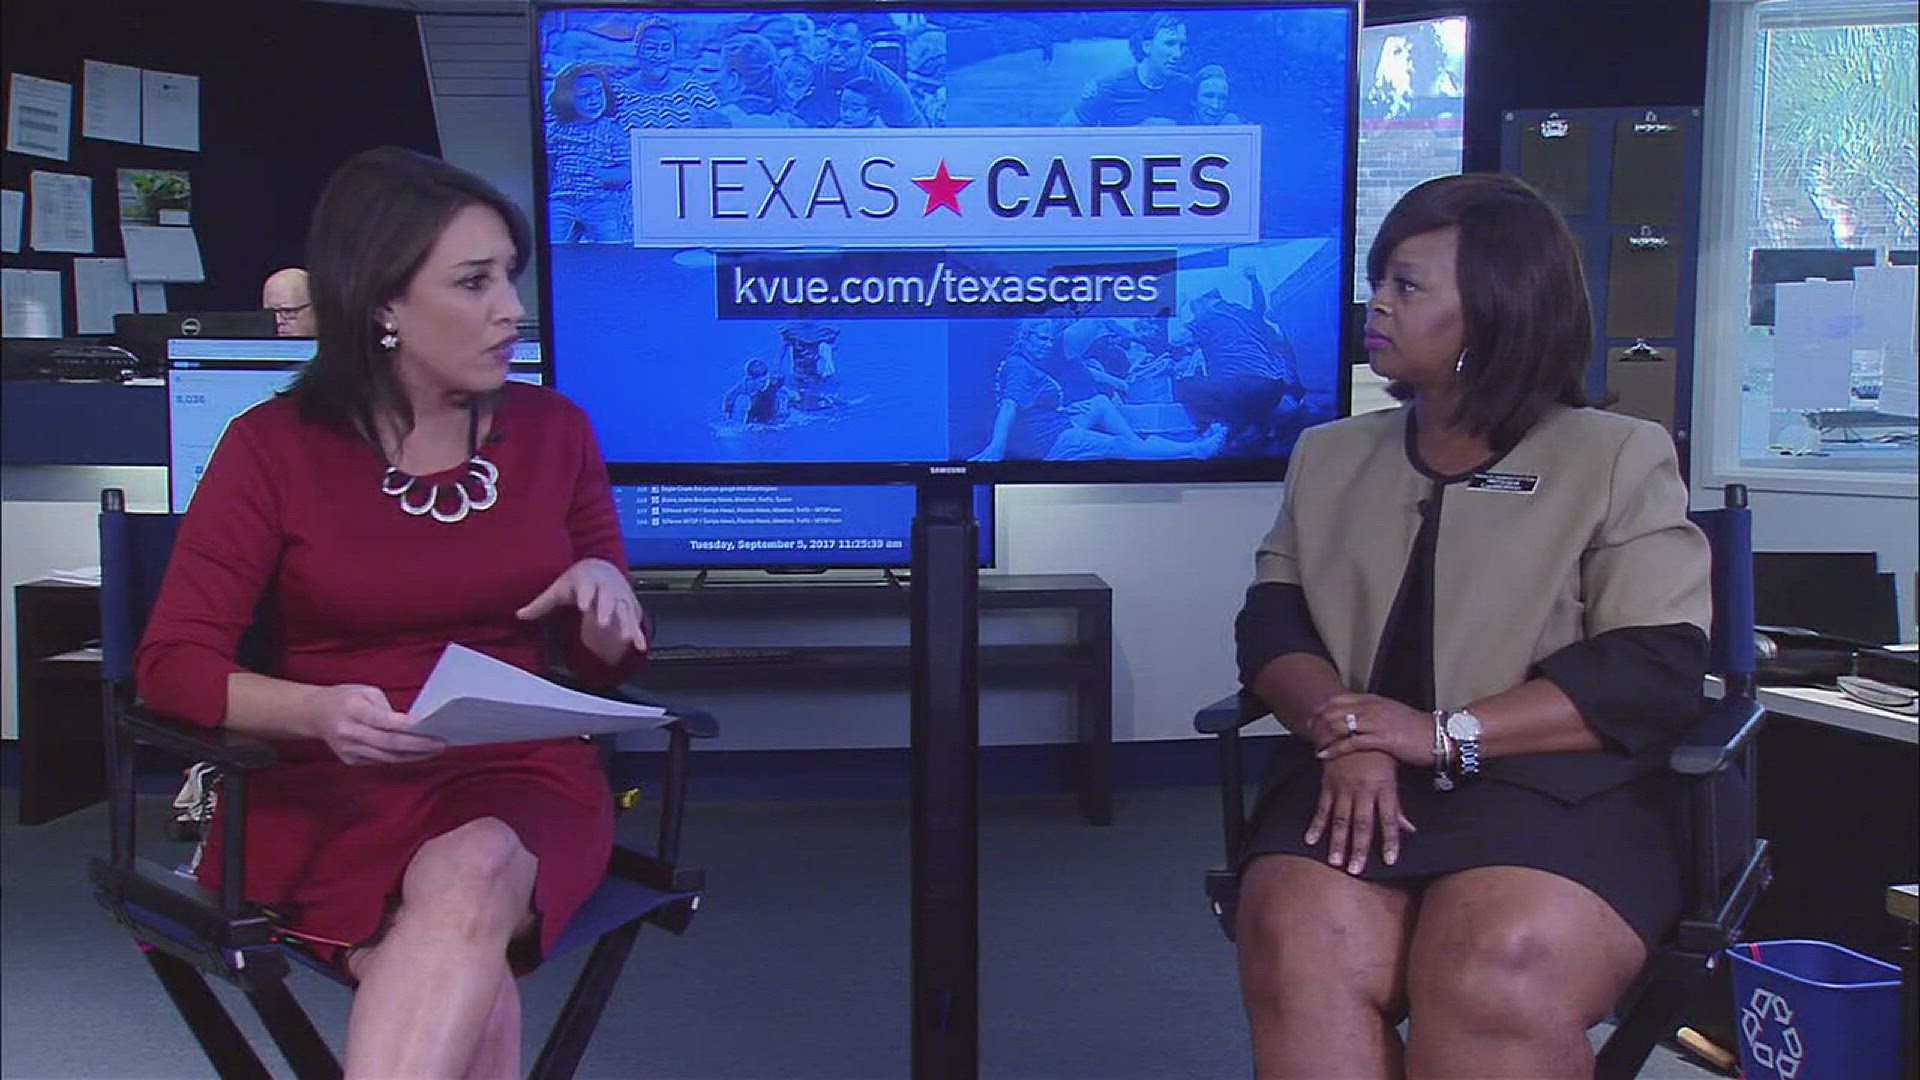 Tresha Silva, executive director of the Bastrop Food Pantry, discusses how the pantry is assisting people impacted by Hurricane Harvey by providing food assistance, cleaning supplies and system navigation. Donate to Texas Cares: http://www.kvue.com/TexasC